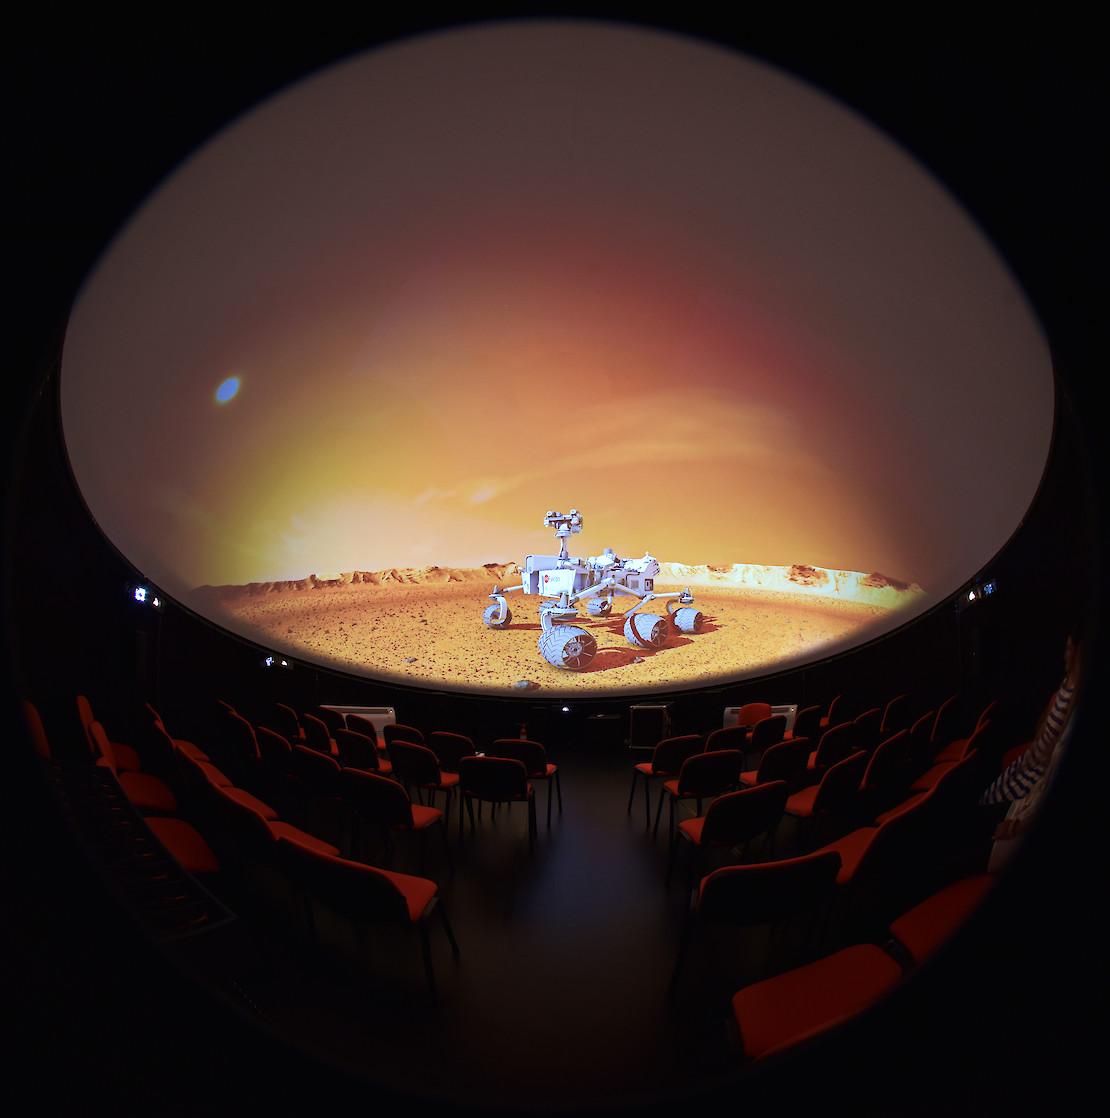 Mars rover displayed on the dome screen of a Screenberry-driven fulldome theater in Castellana Grotte, Italy